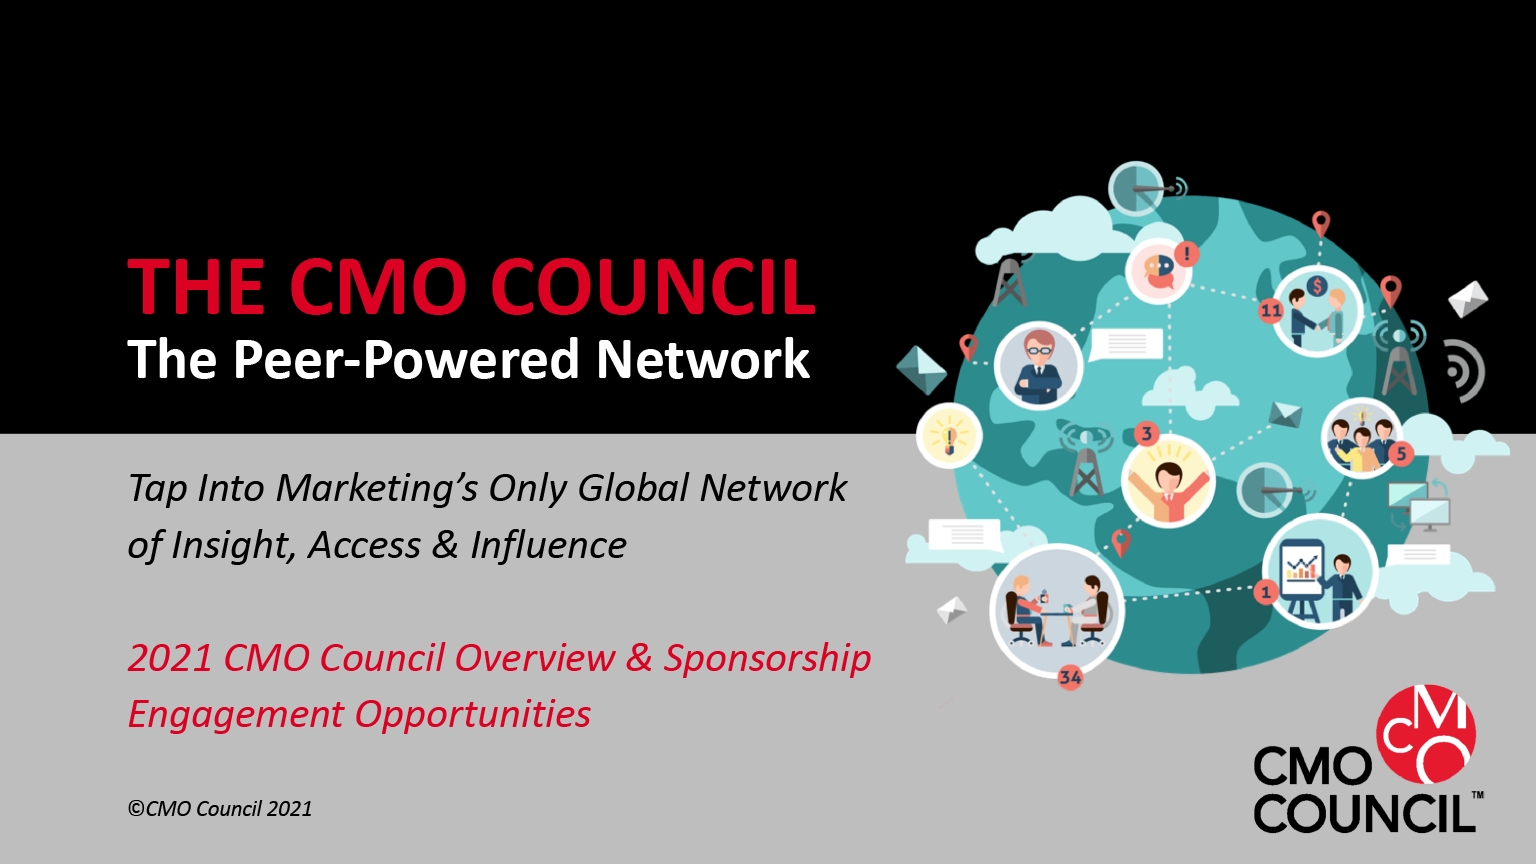 The CMO Council Overview 